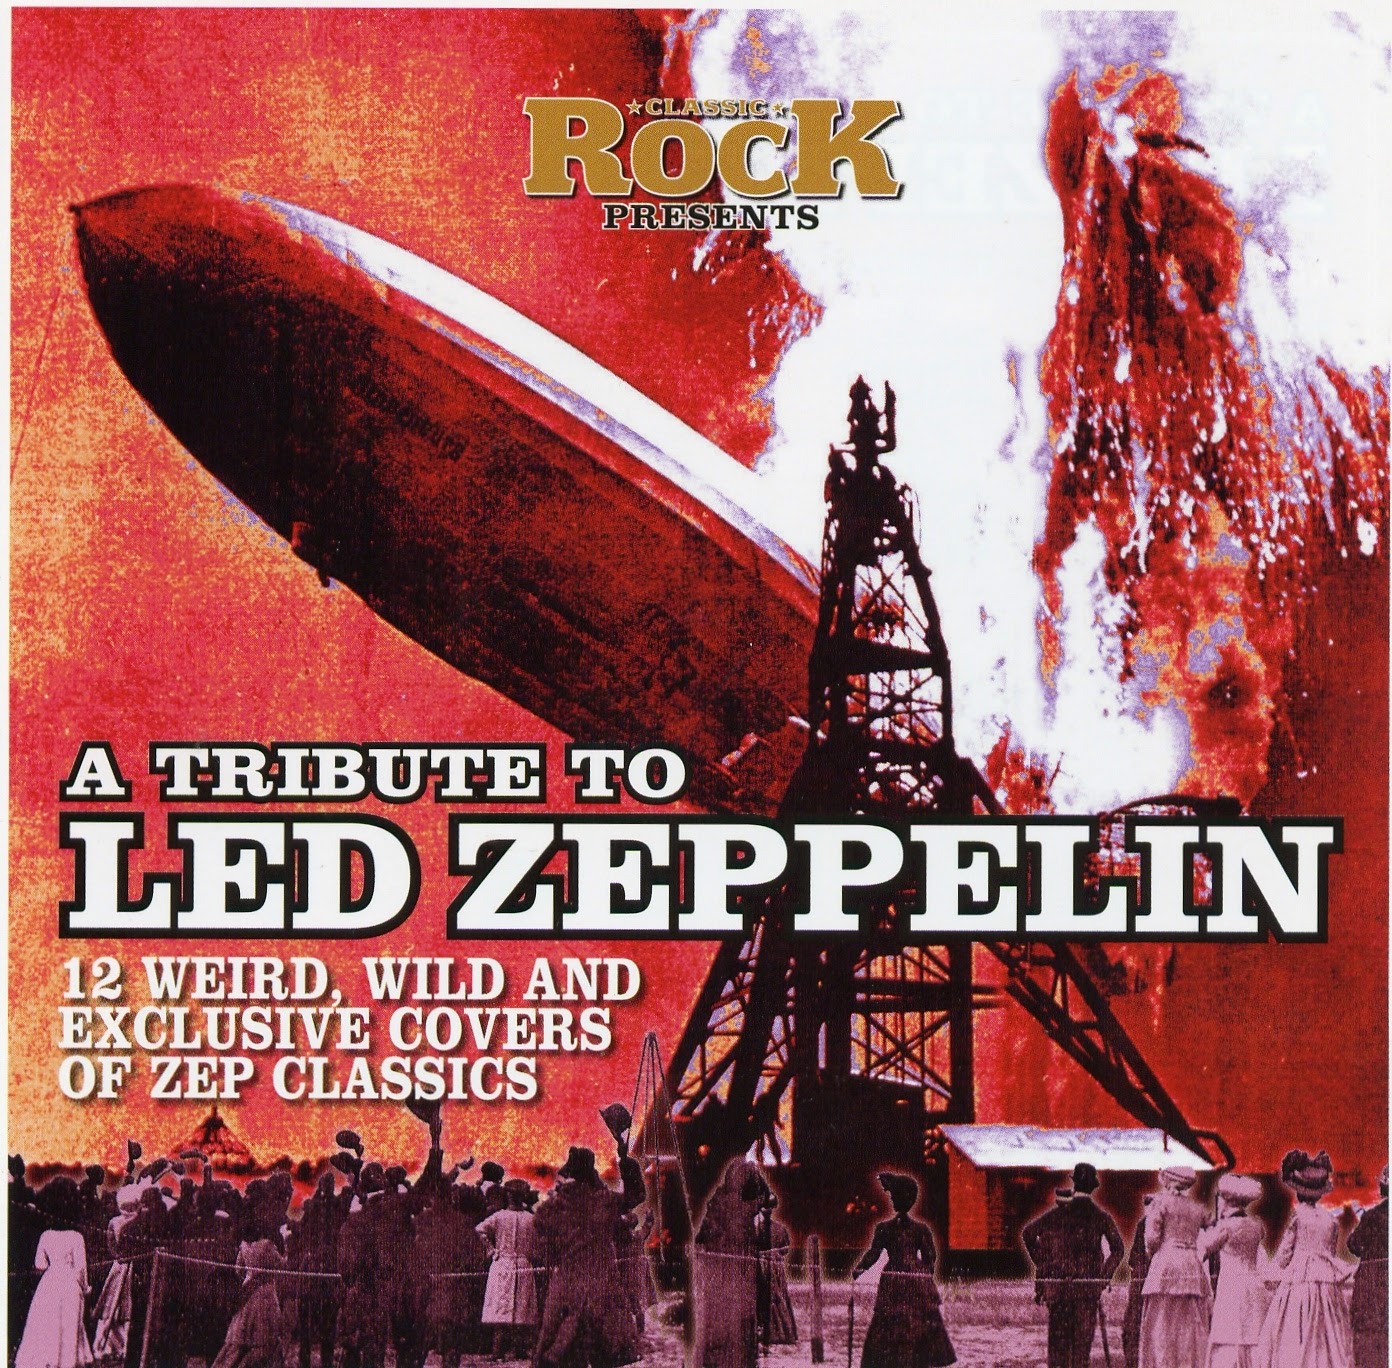  A Tribute to Led Zeppelin (Uk Classic Rock Magazine) 2008 Comp%2BA%2BTribute%2BTo%2BLed%2BZeppelin.%2BFront